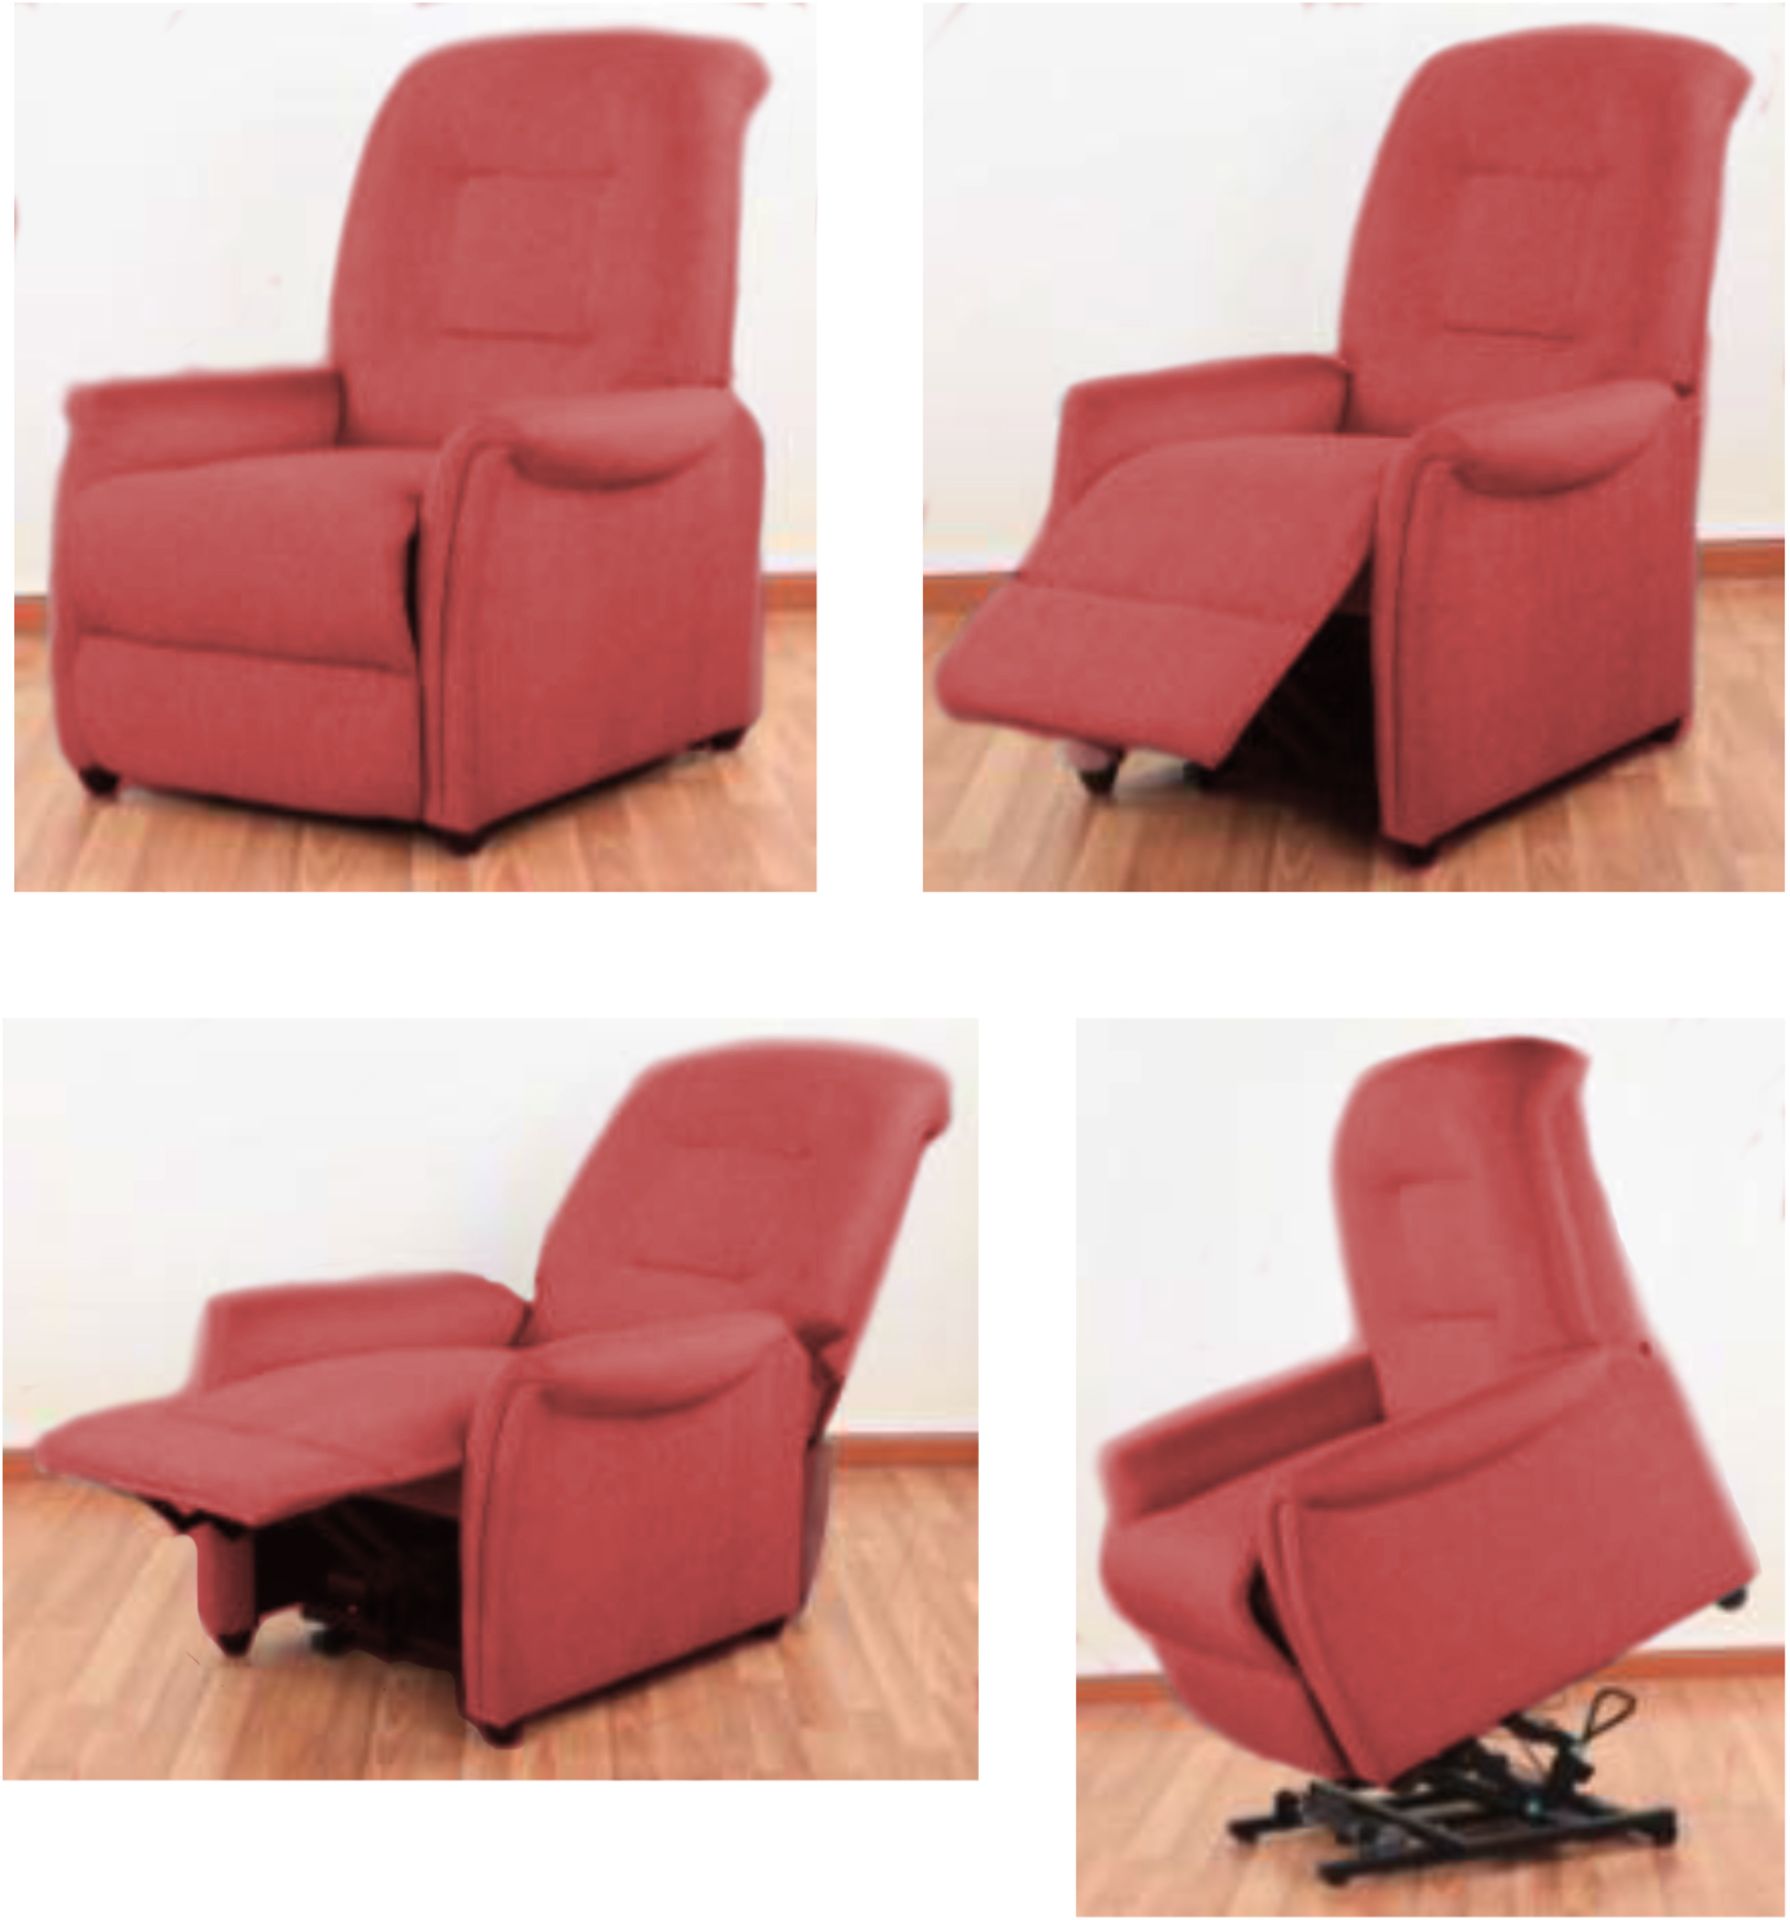 V  Grade A Red Velour Rise & Recline Electric Chair With Remote Control Brand New In Box RRP £999 X - Image 2 of 2